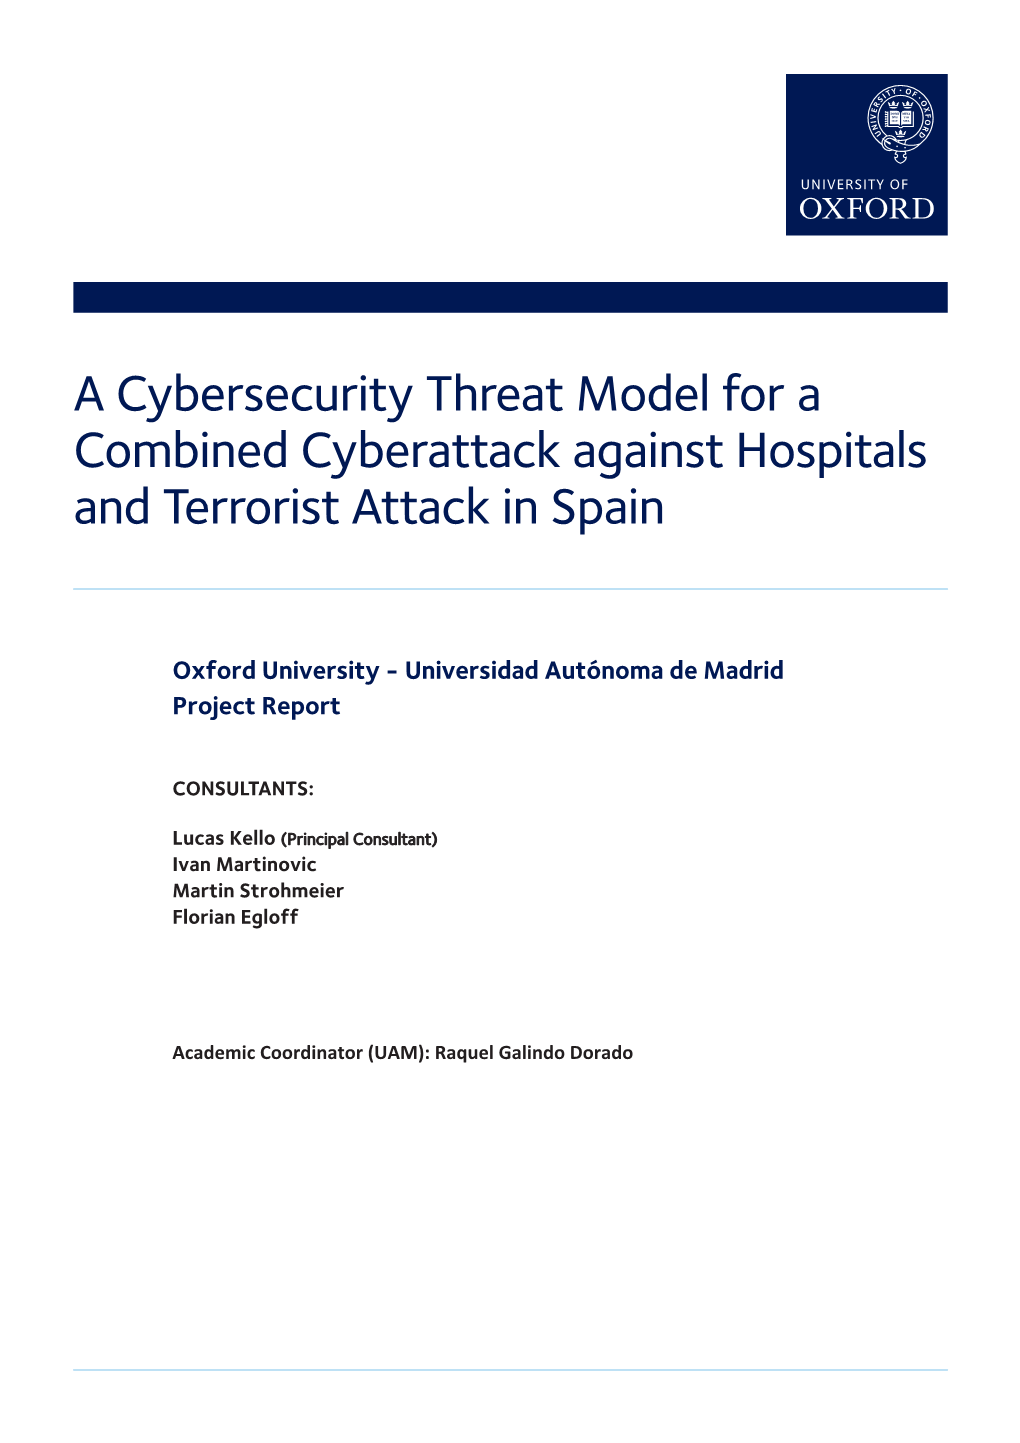 A Cybersecurity Threat Model for a Combined Cyberattack Against Hospitals and Terrorist Attack in Spain